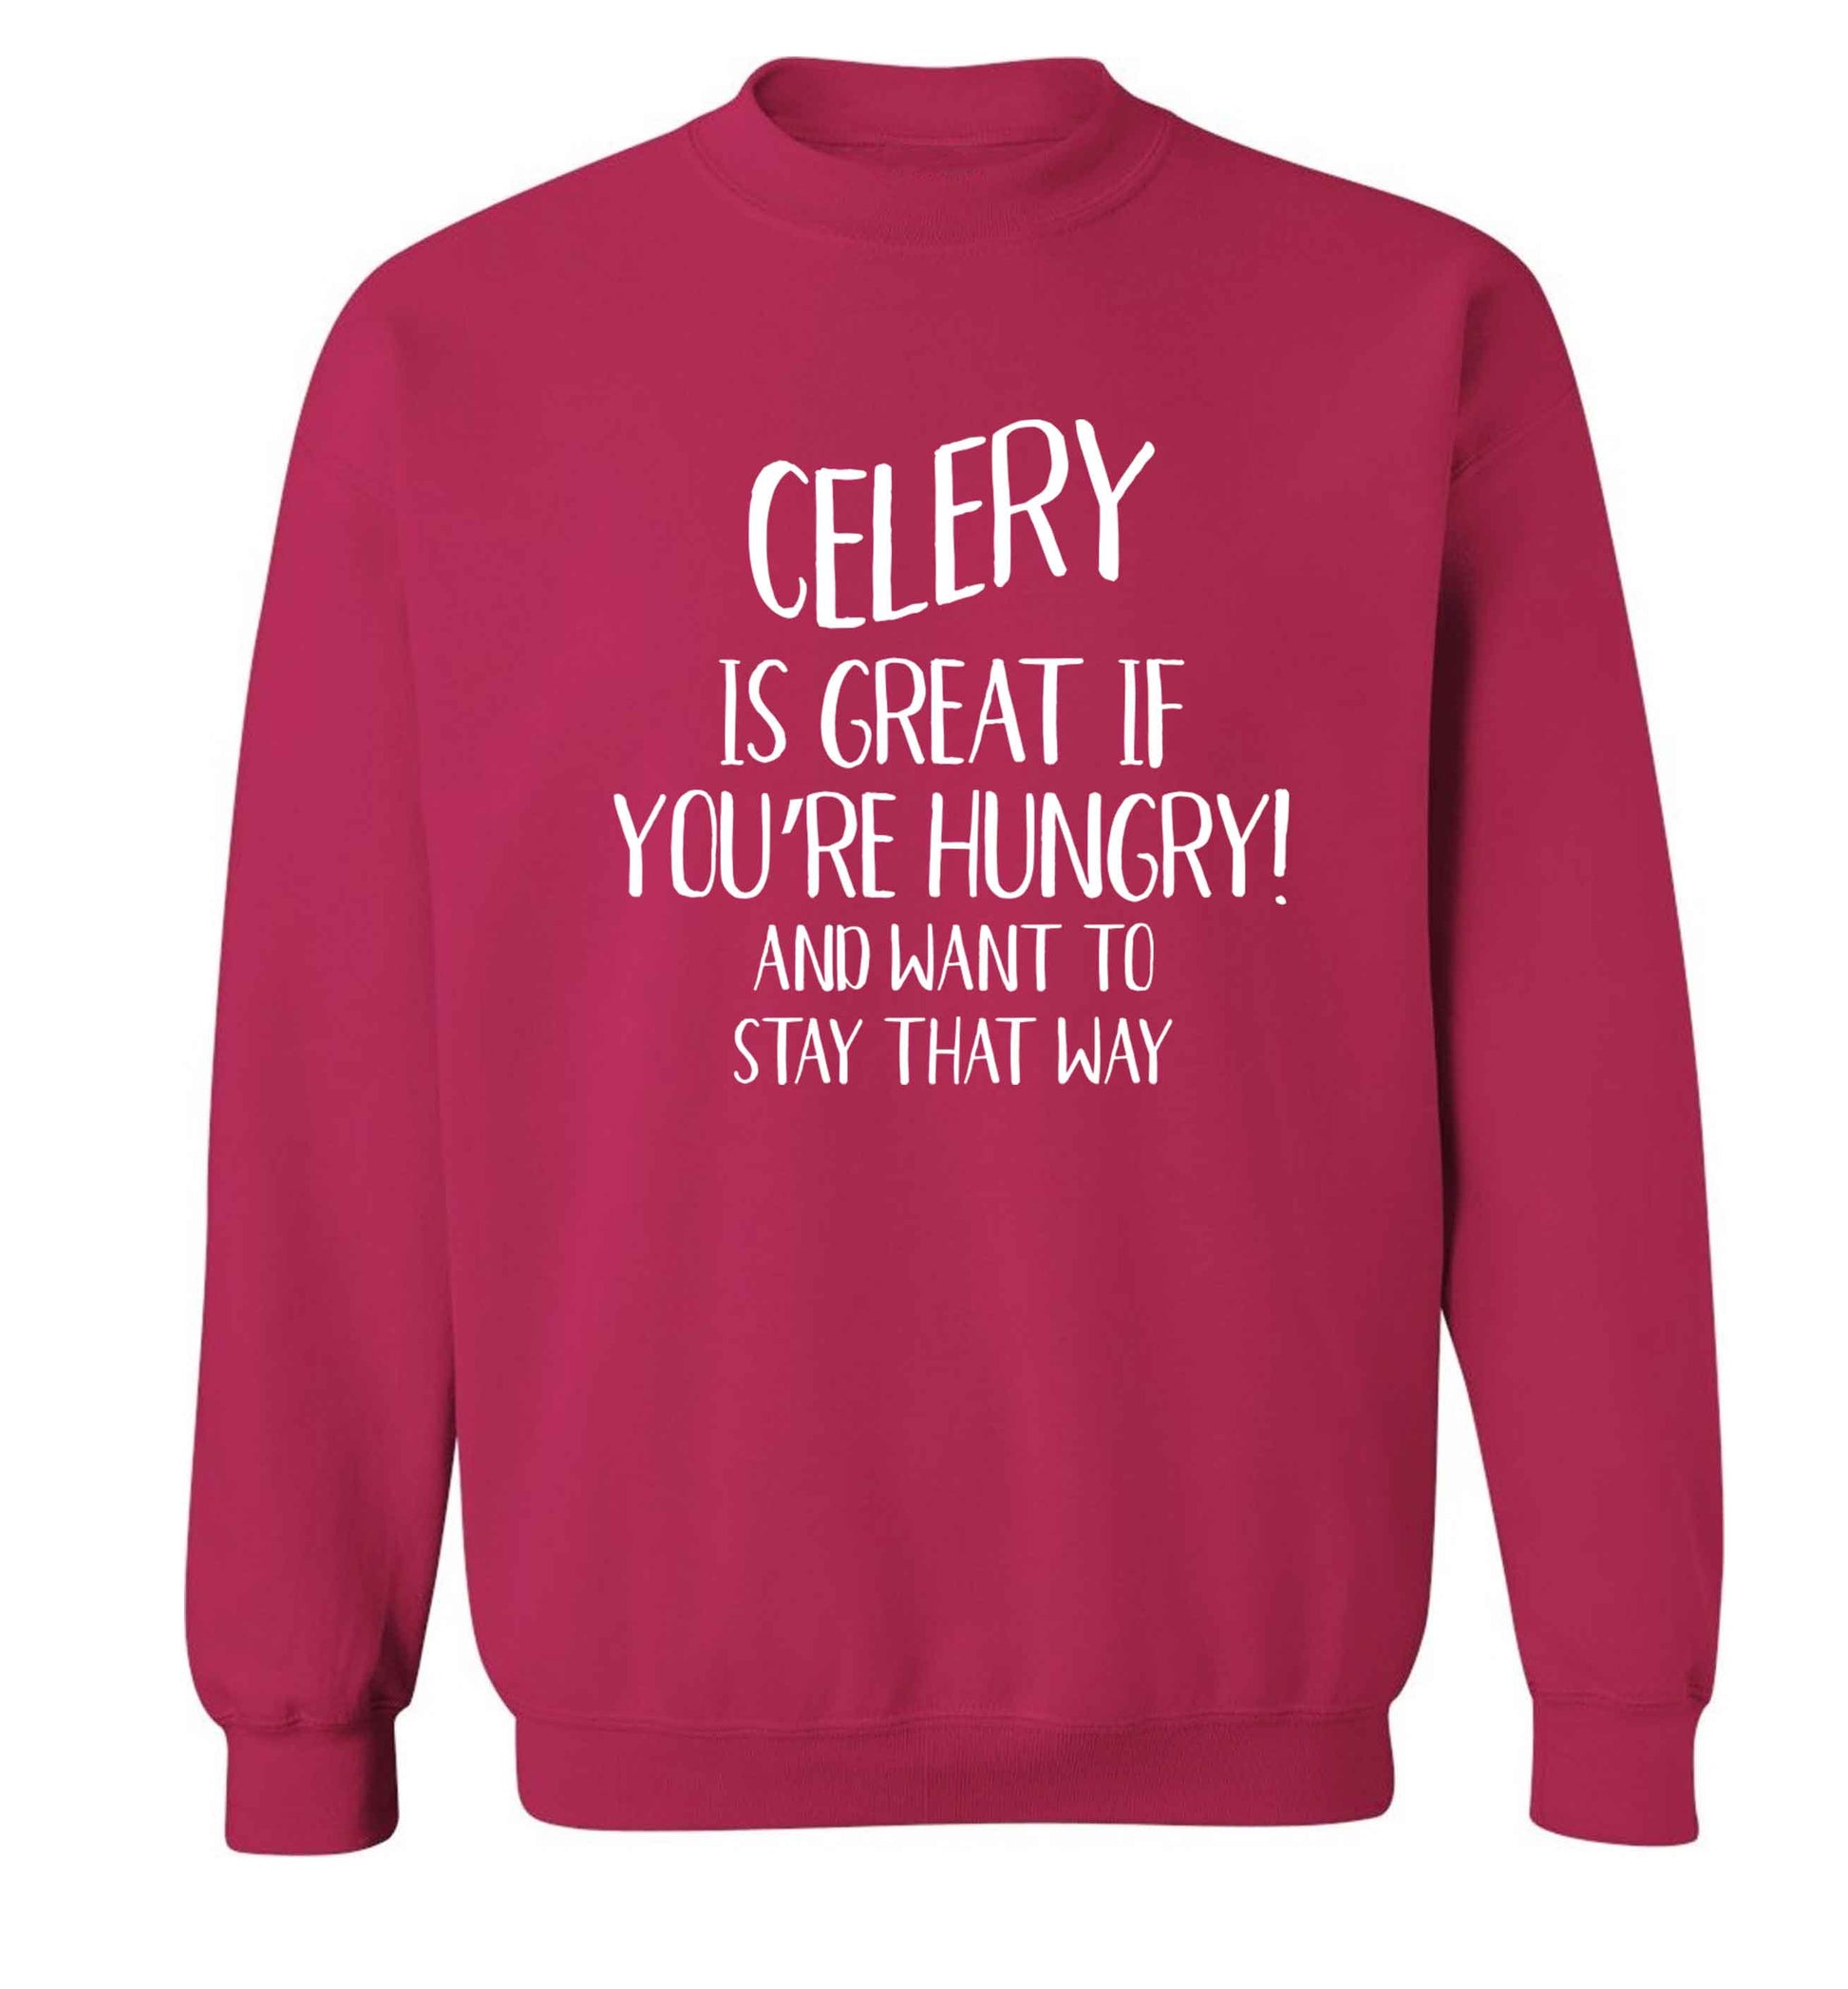 Cellery is great when you're hungry and want to stay that way Adult's unisex pink Sweater 2XL